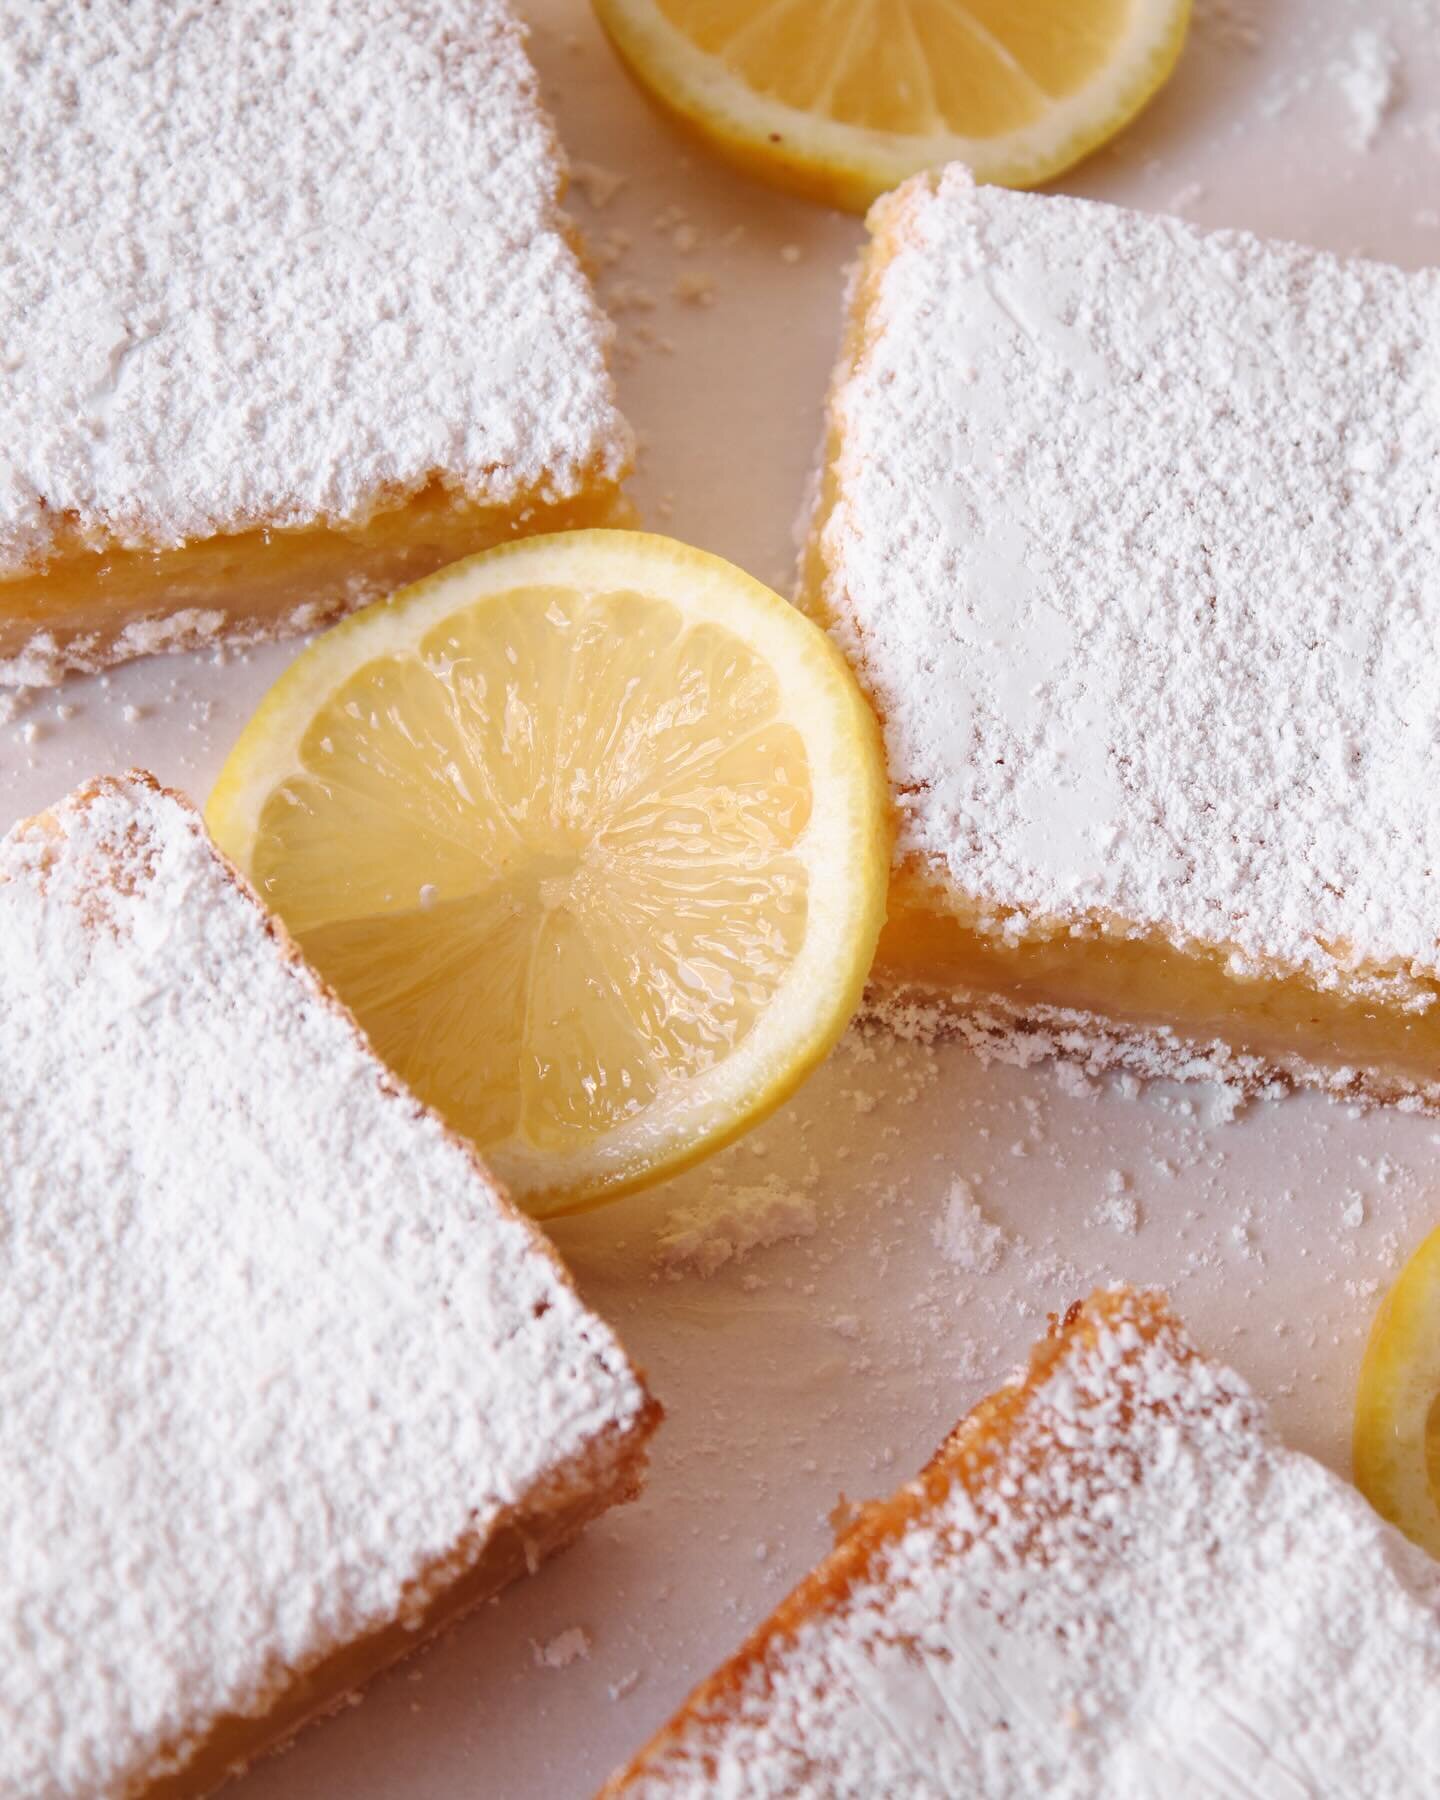 🍋LEMON BARS🍋
Buttery crust layered with our zesty lemon filling and then dusted with powdered sugar to bring it all together! The perfect dessert bar for any spring day ✨
Available daily!

#bakedon8th #bakery #nashvillebakery #nashville #nashvillet